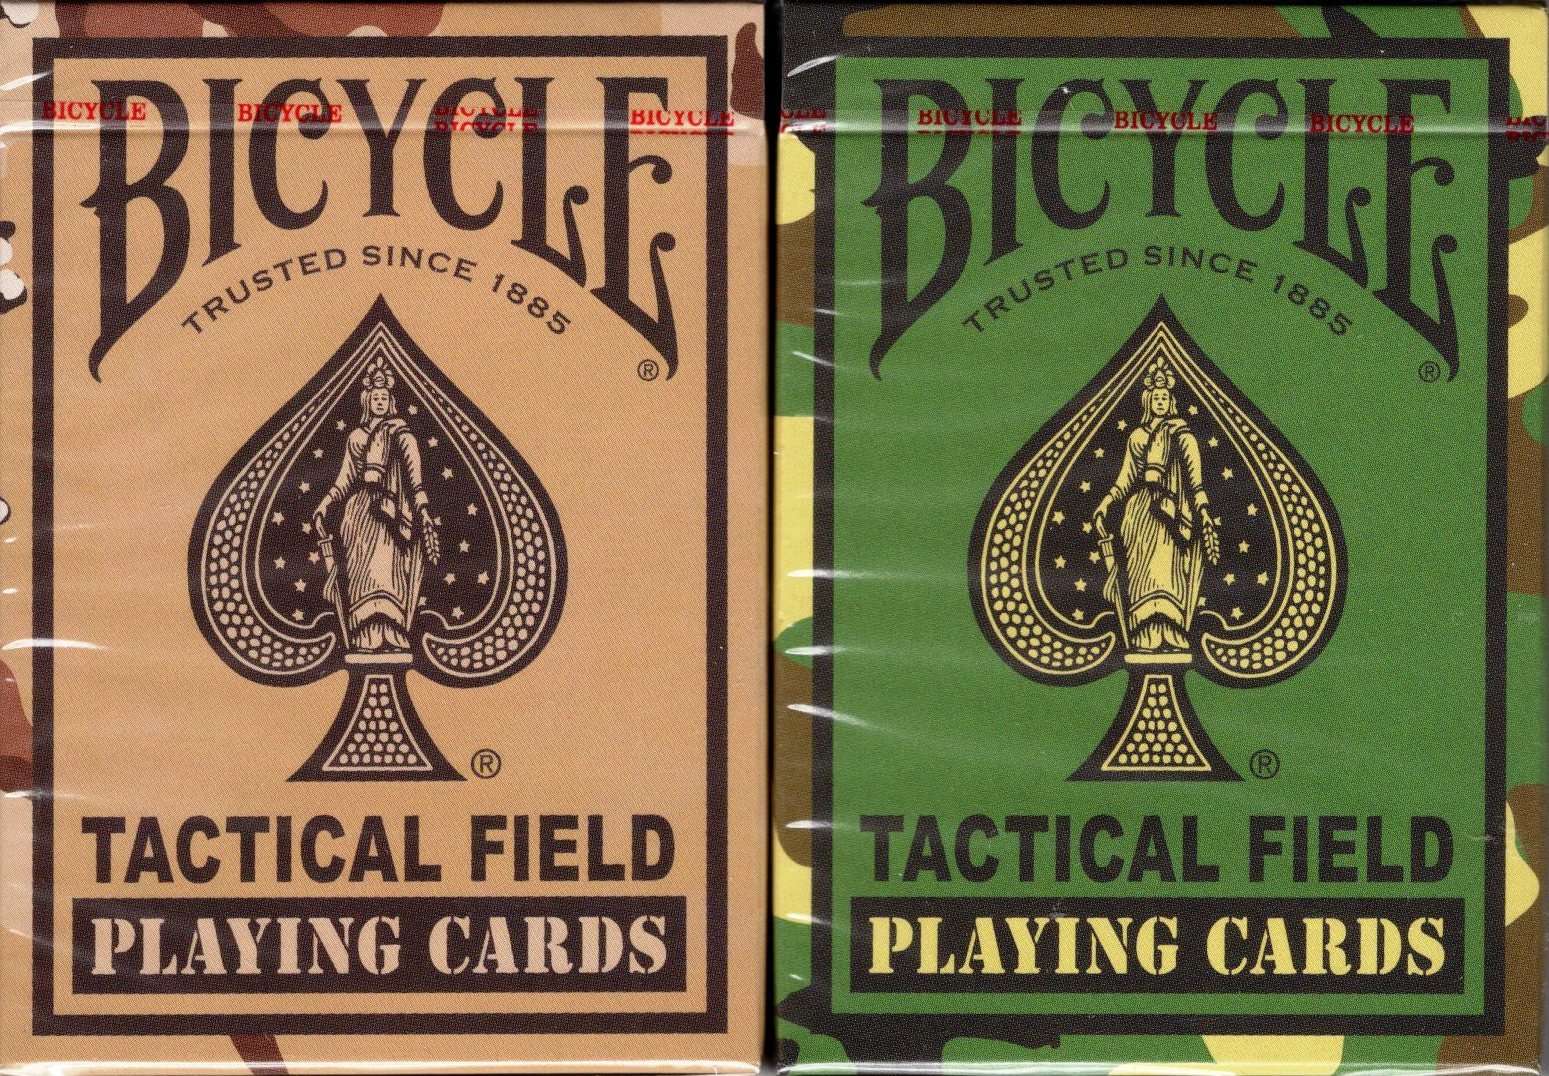 PlayingCardDecks.com-Tactical Field v2 Bicycle Playing Cards: 2 Deck Set